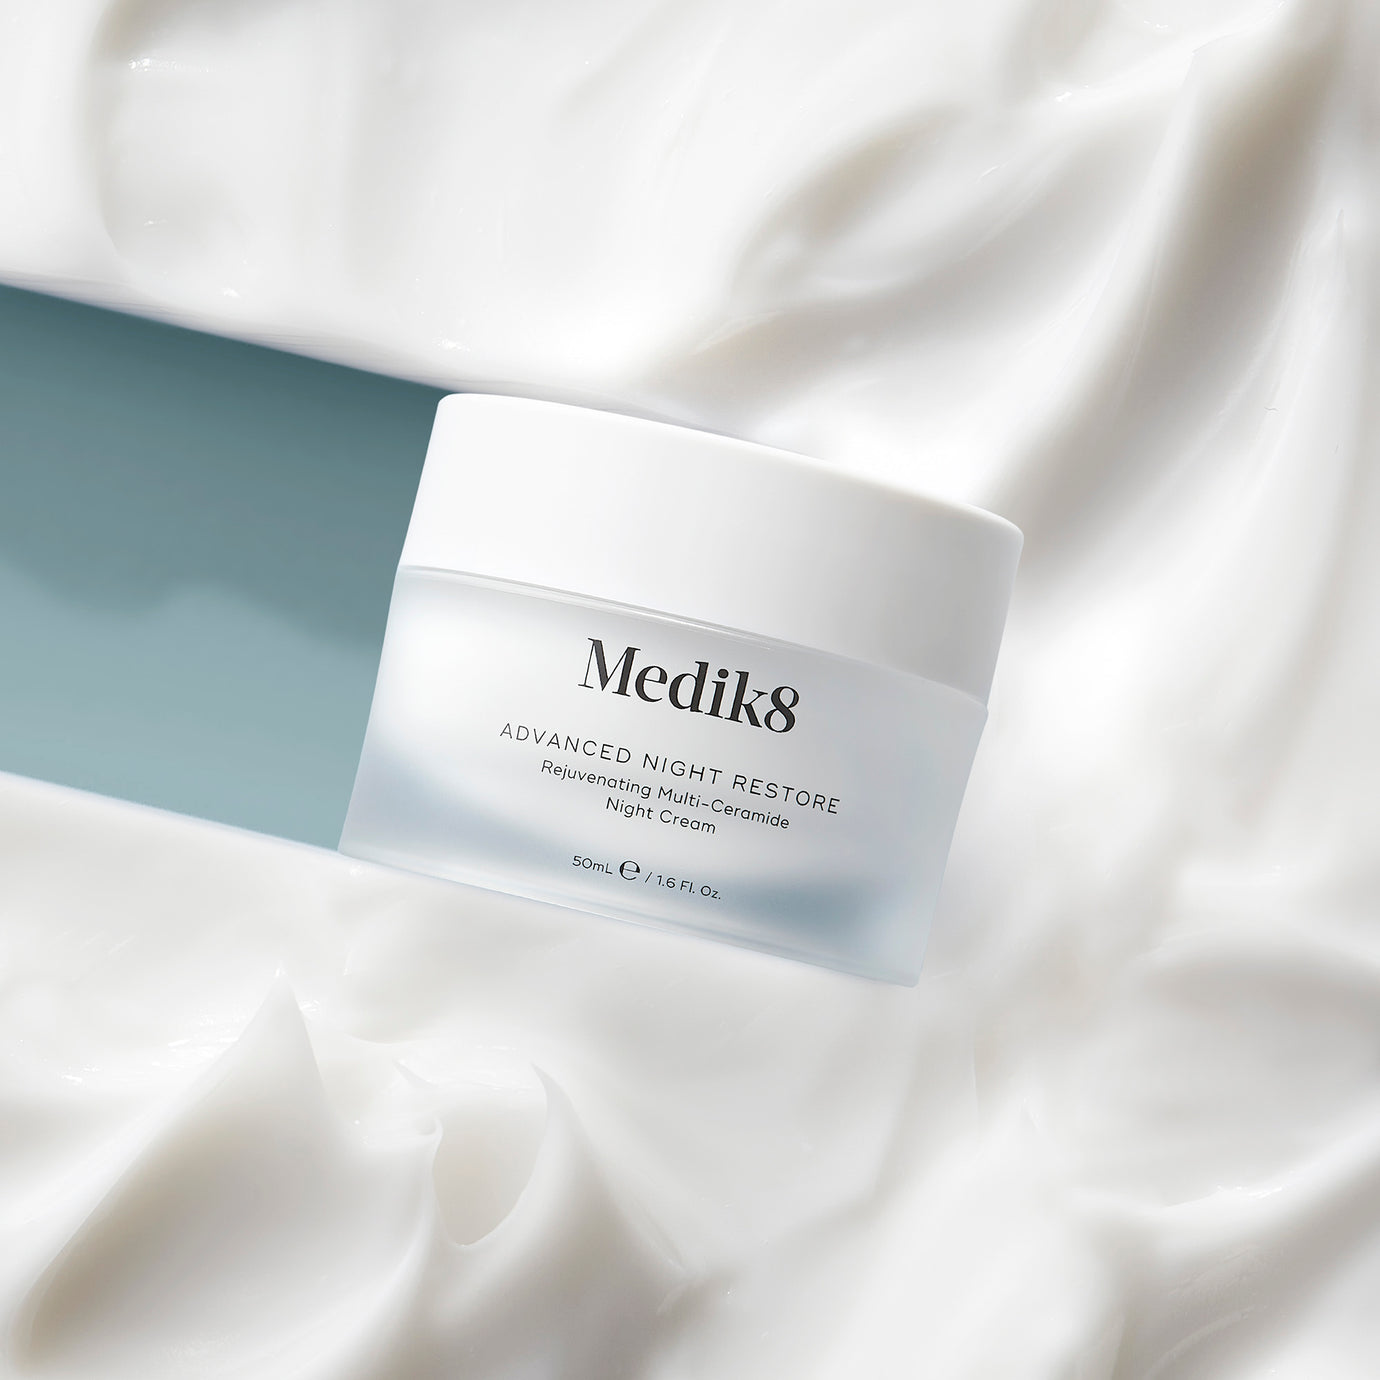 Discover our bestselling ceramide night cream<br><br>